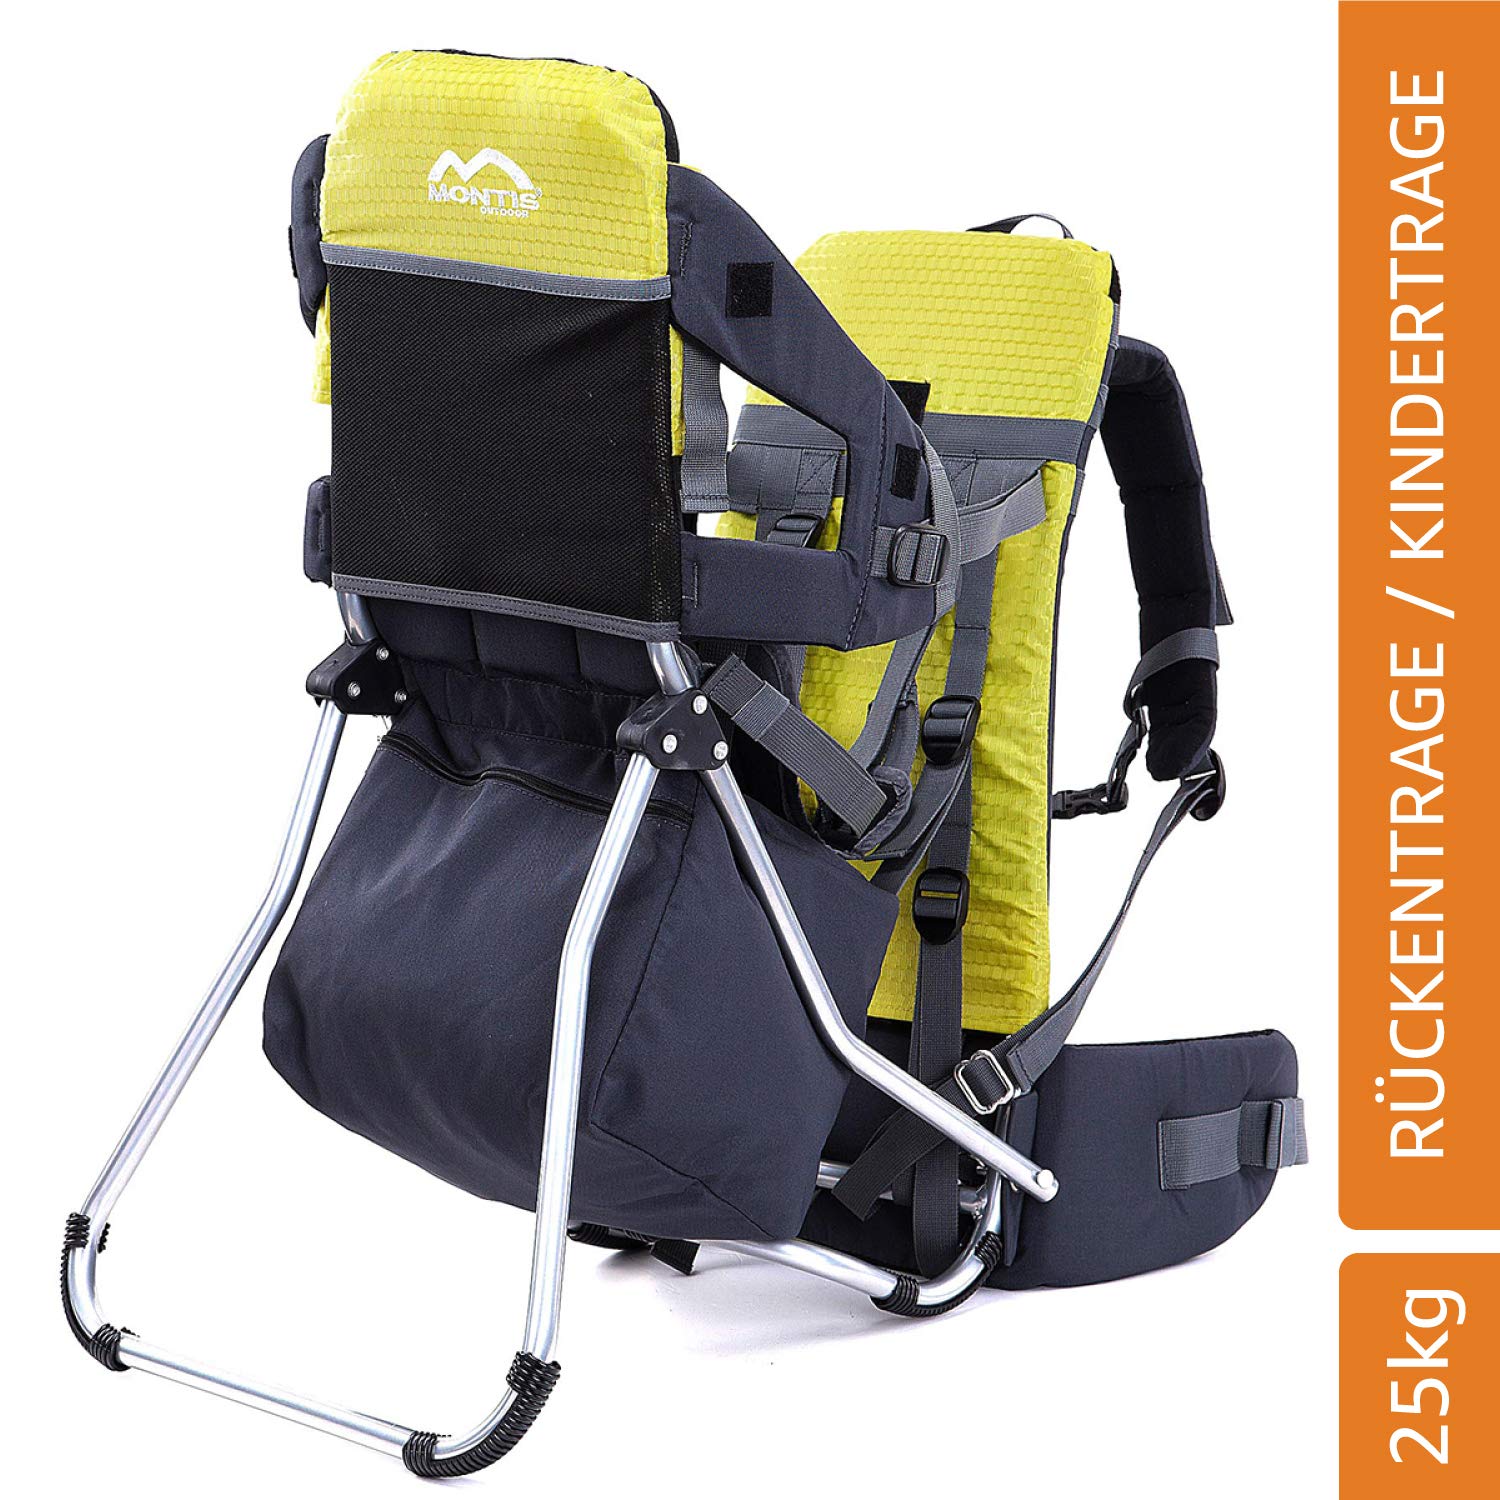 Montis Back Carrier For Children Up To 25 Kg, Babies And Toddlers With Stab